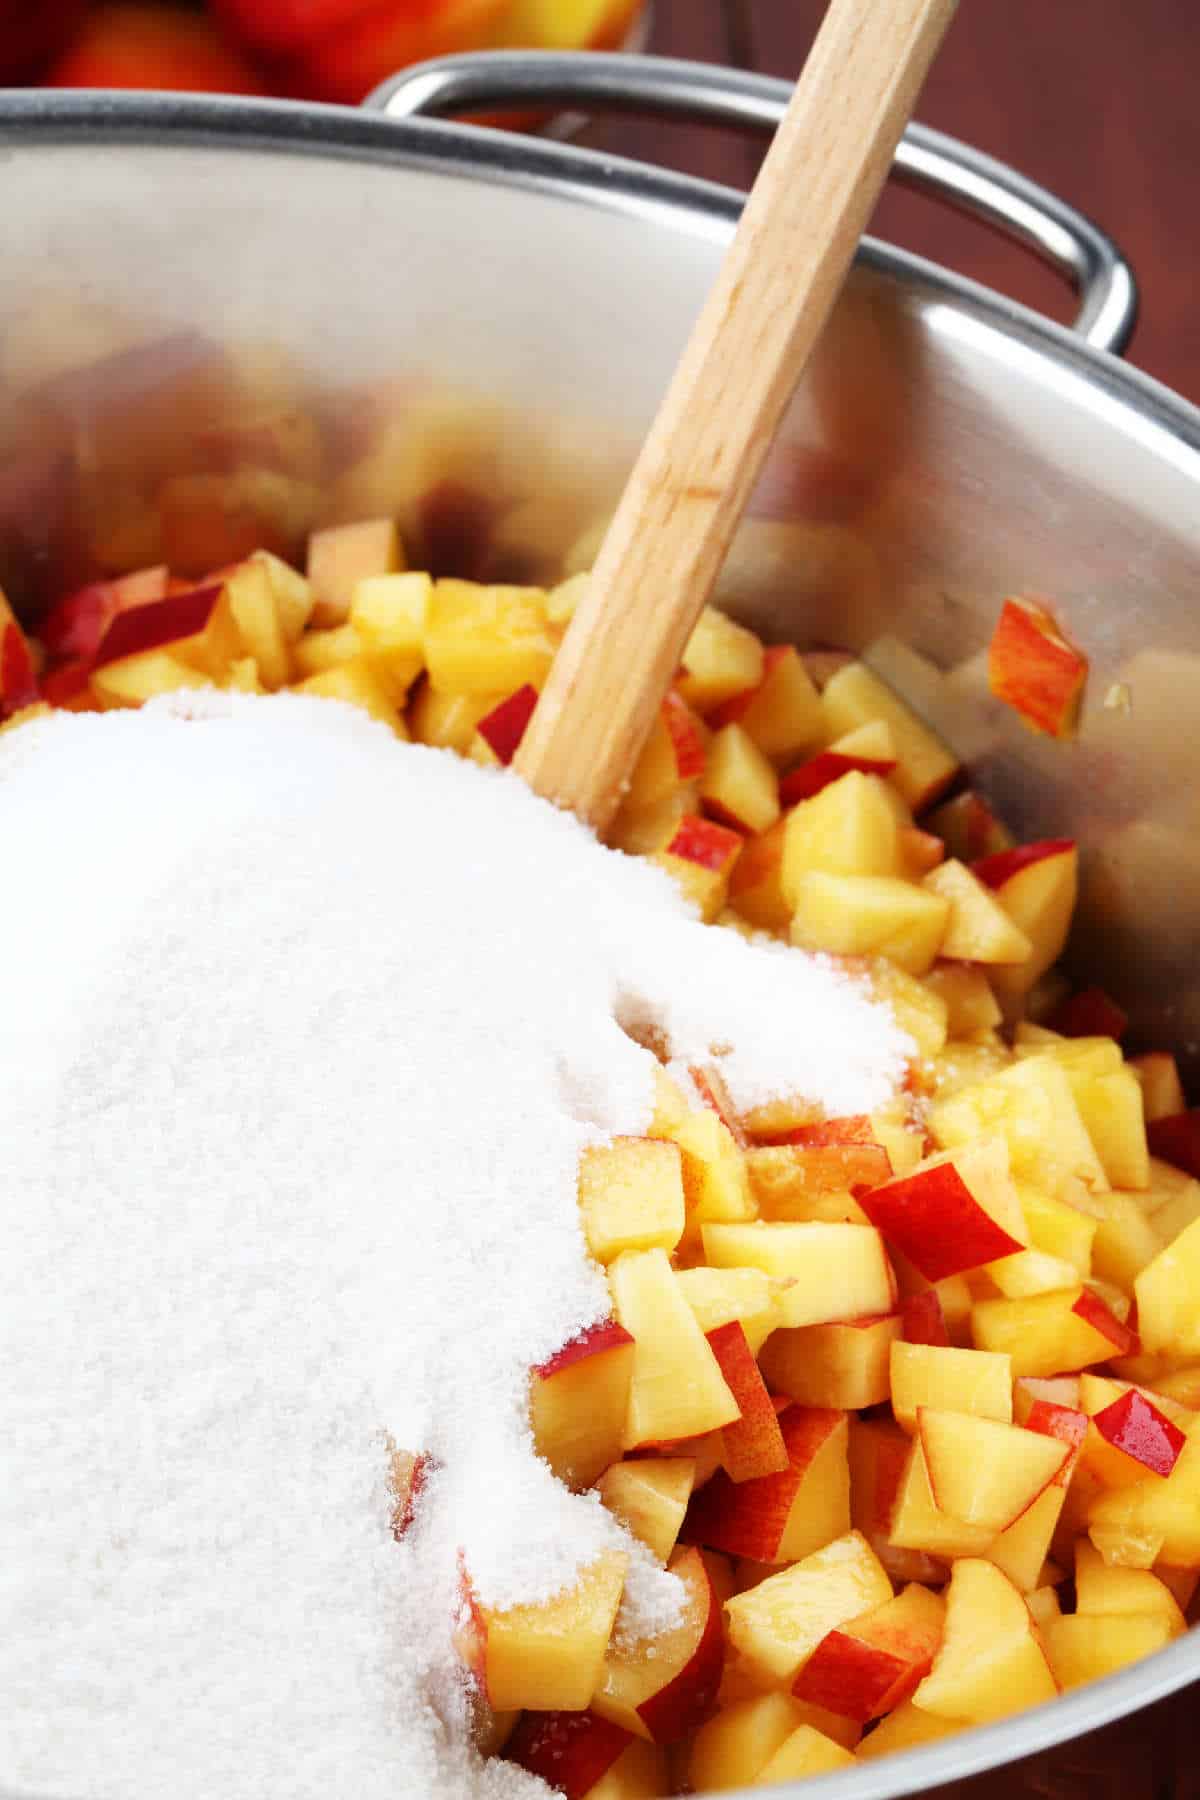 sugar added to pot of diced peaches.